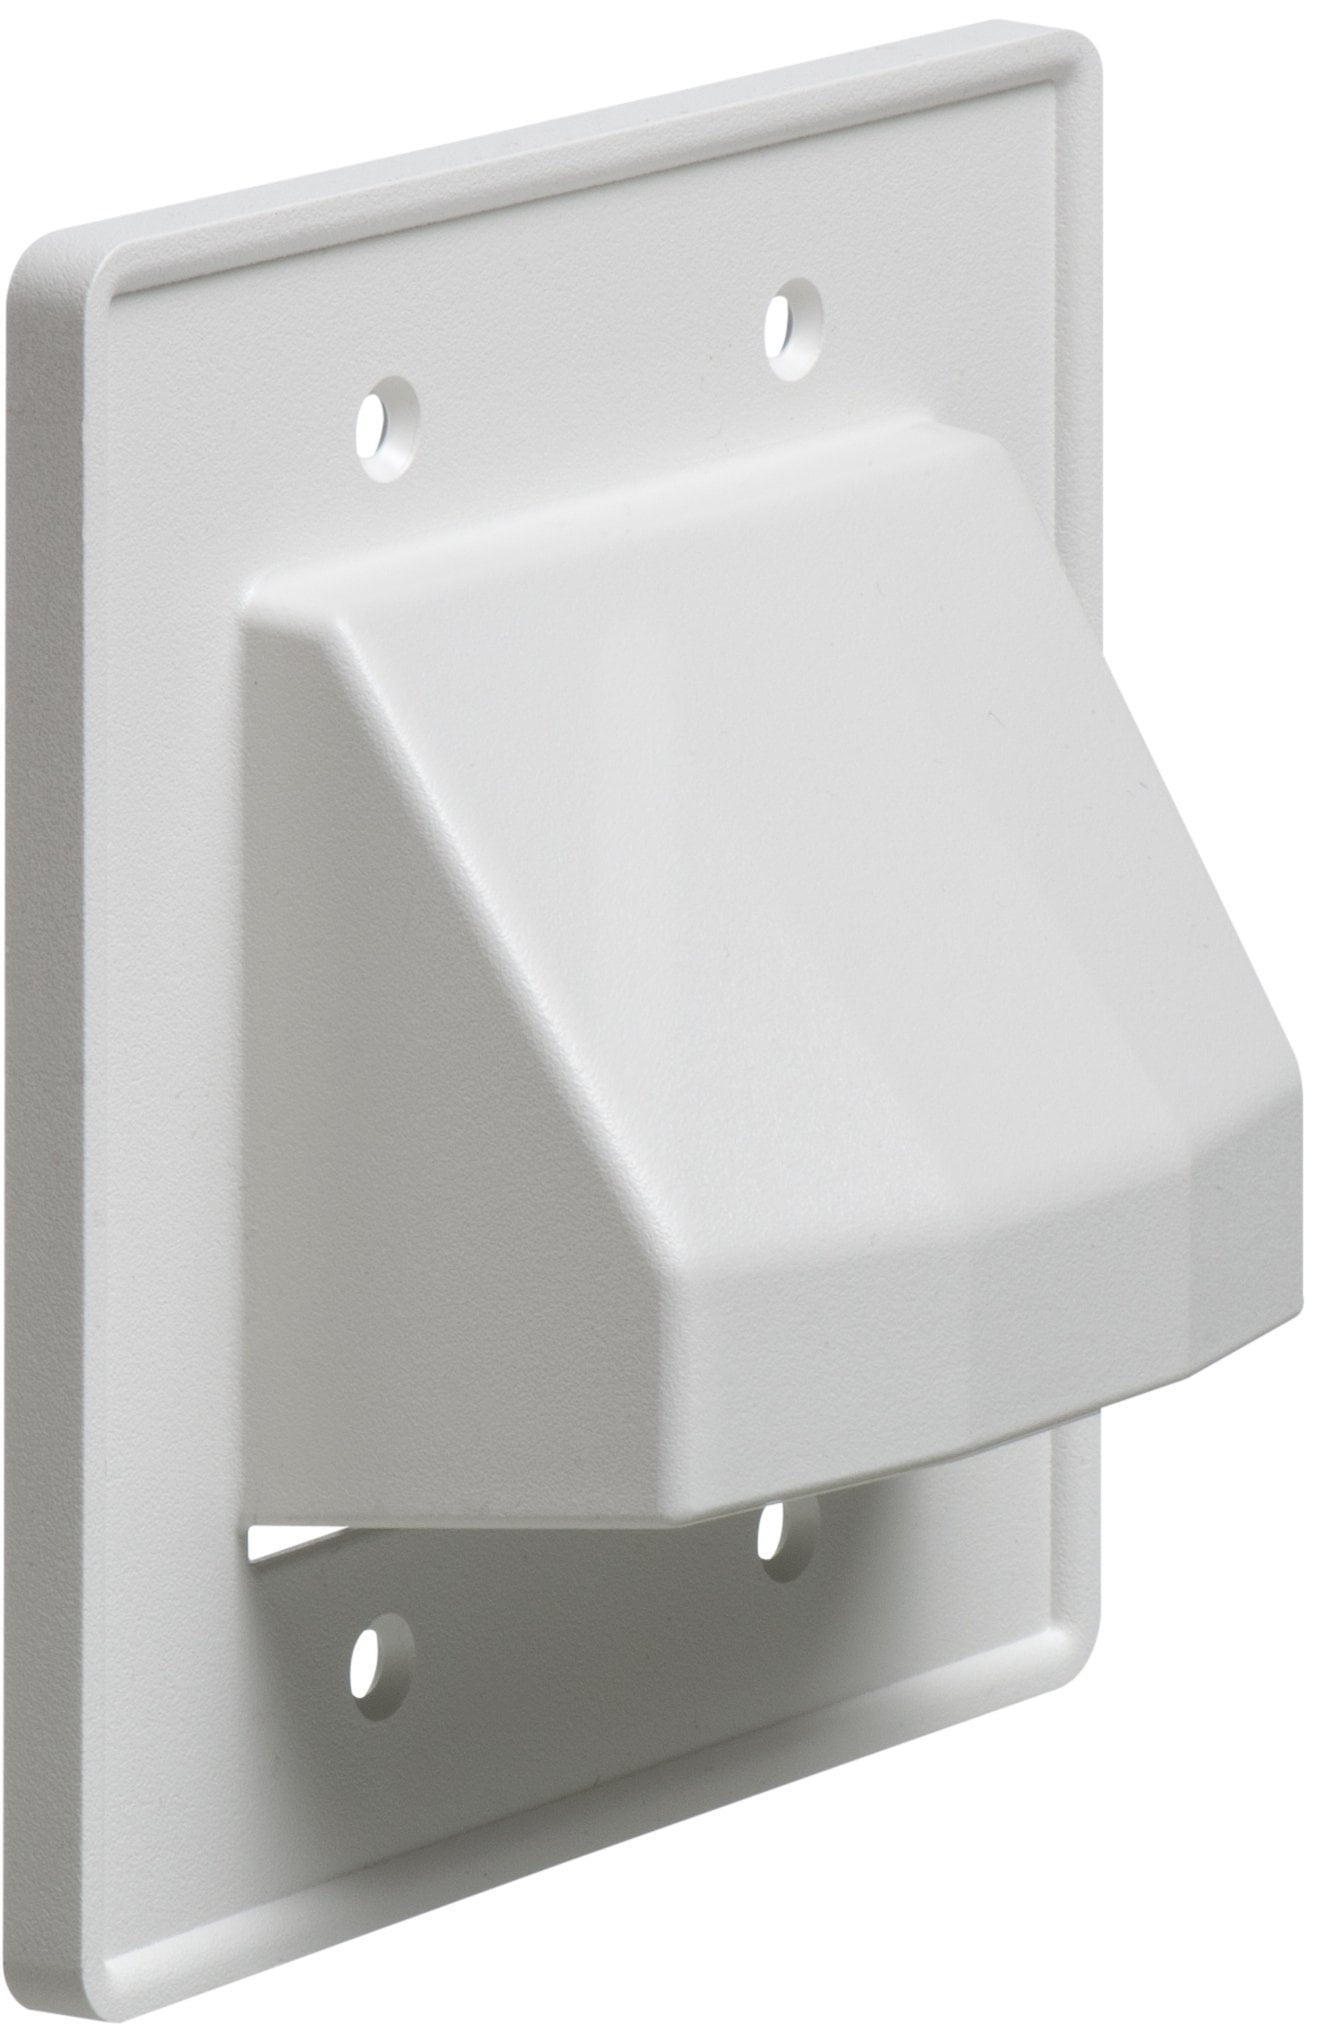 40 x 1-Gang Recessed Low Voltage Cable Wall Plate White 